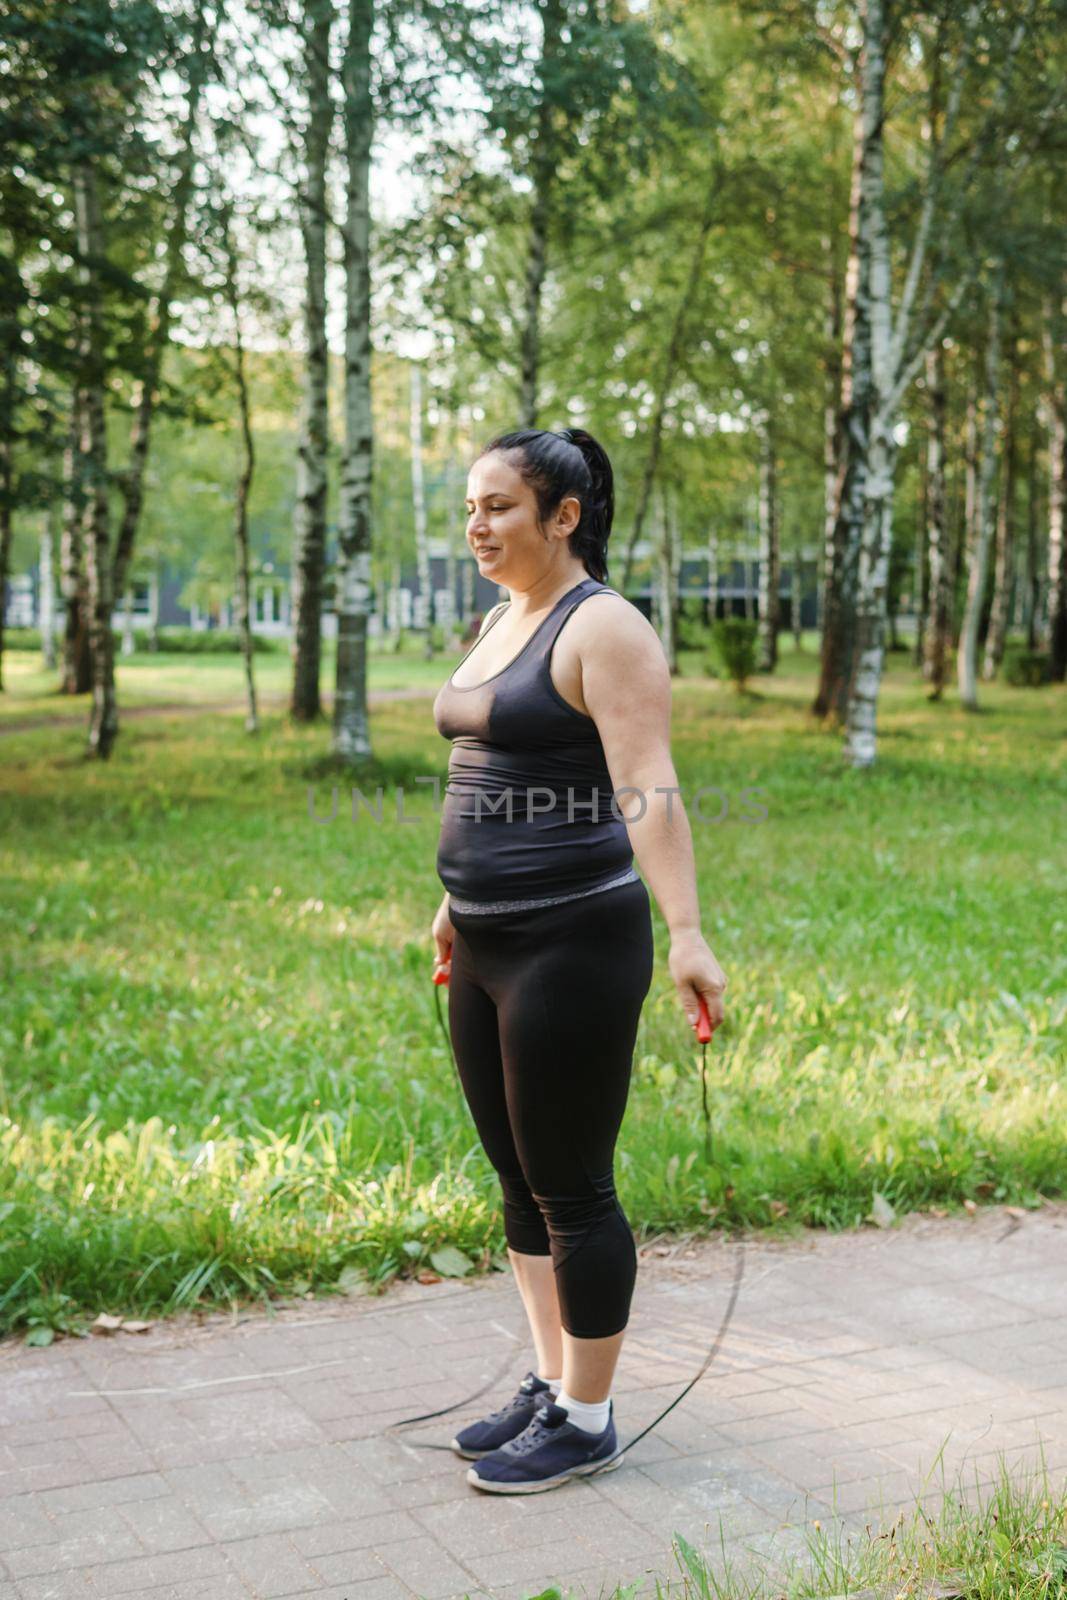 A charming brunette woman plus-size body positive practices sports in nature.